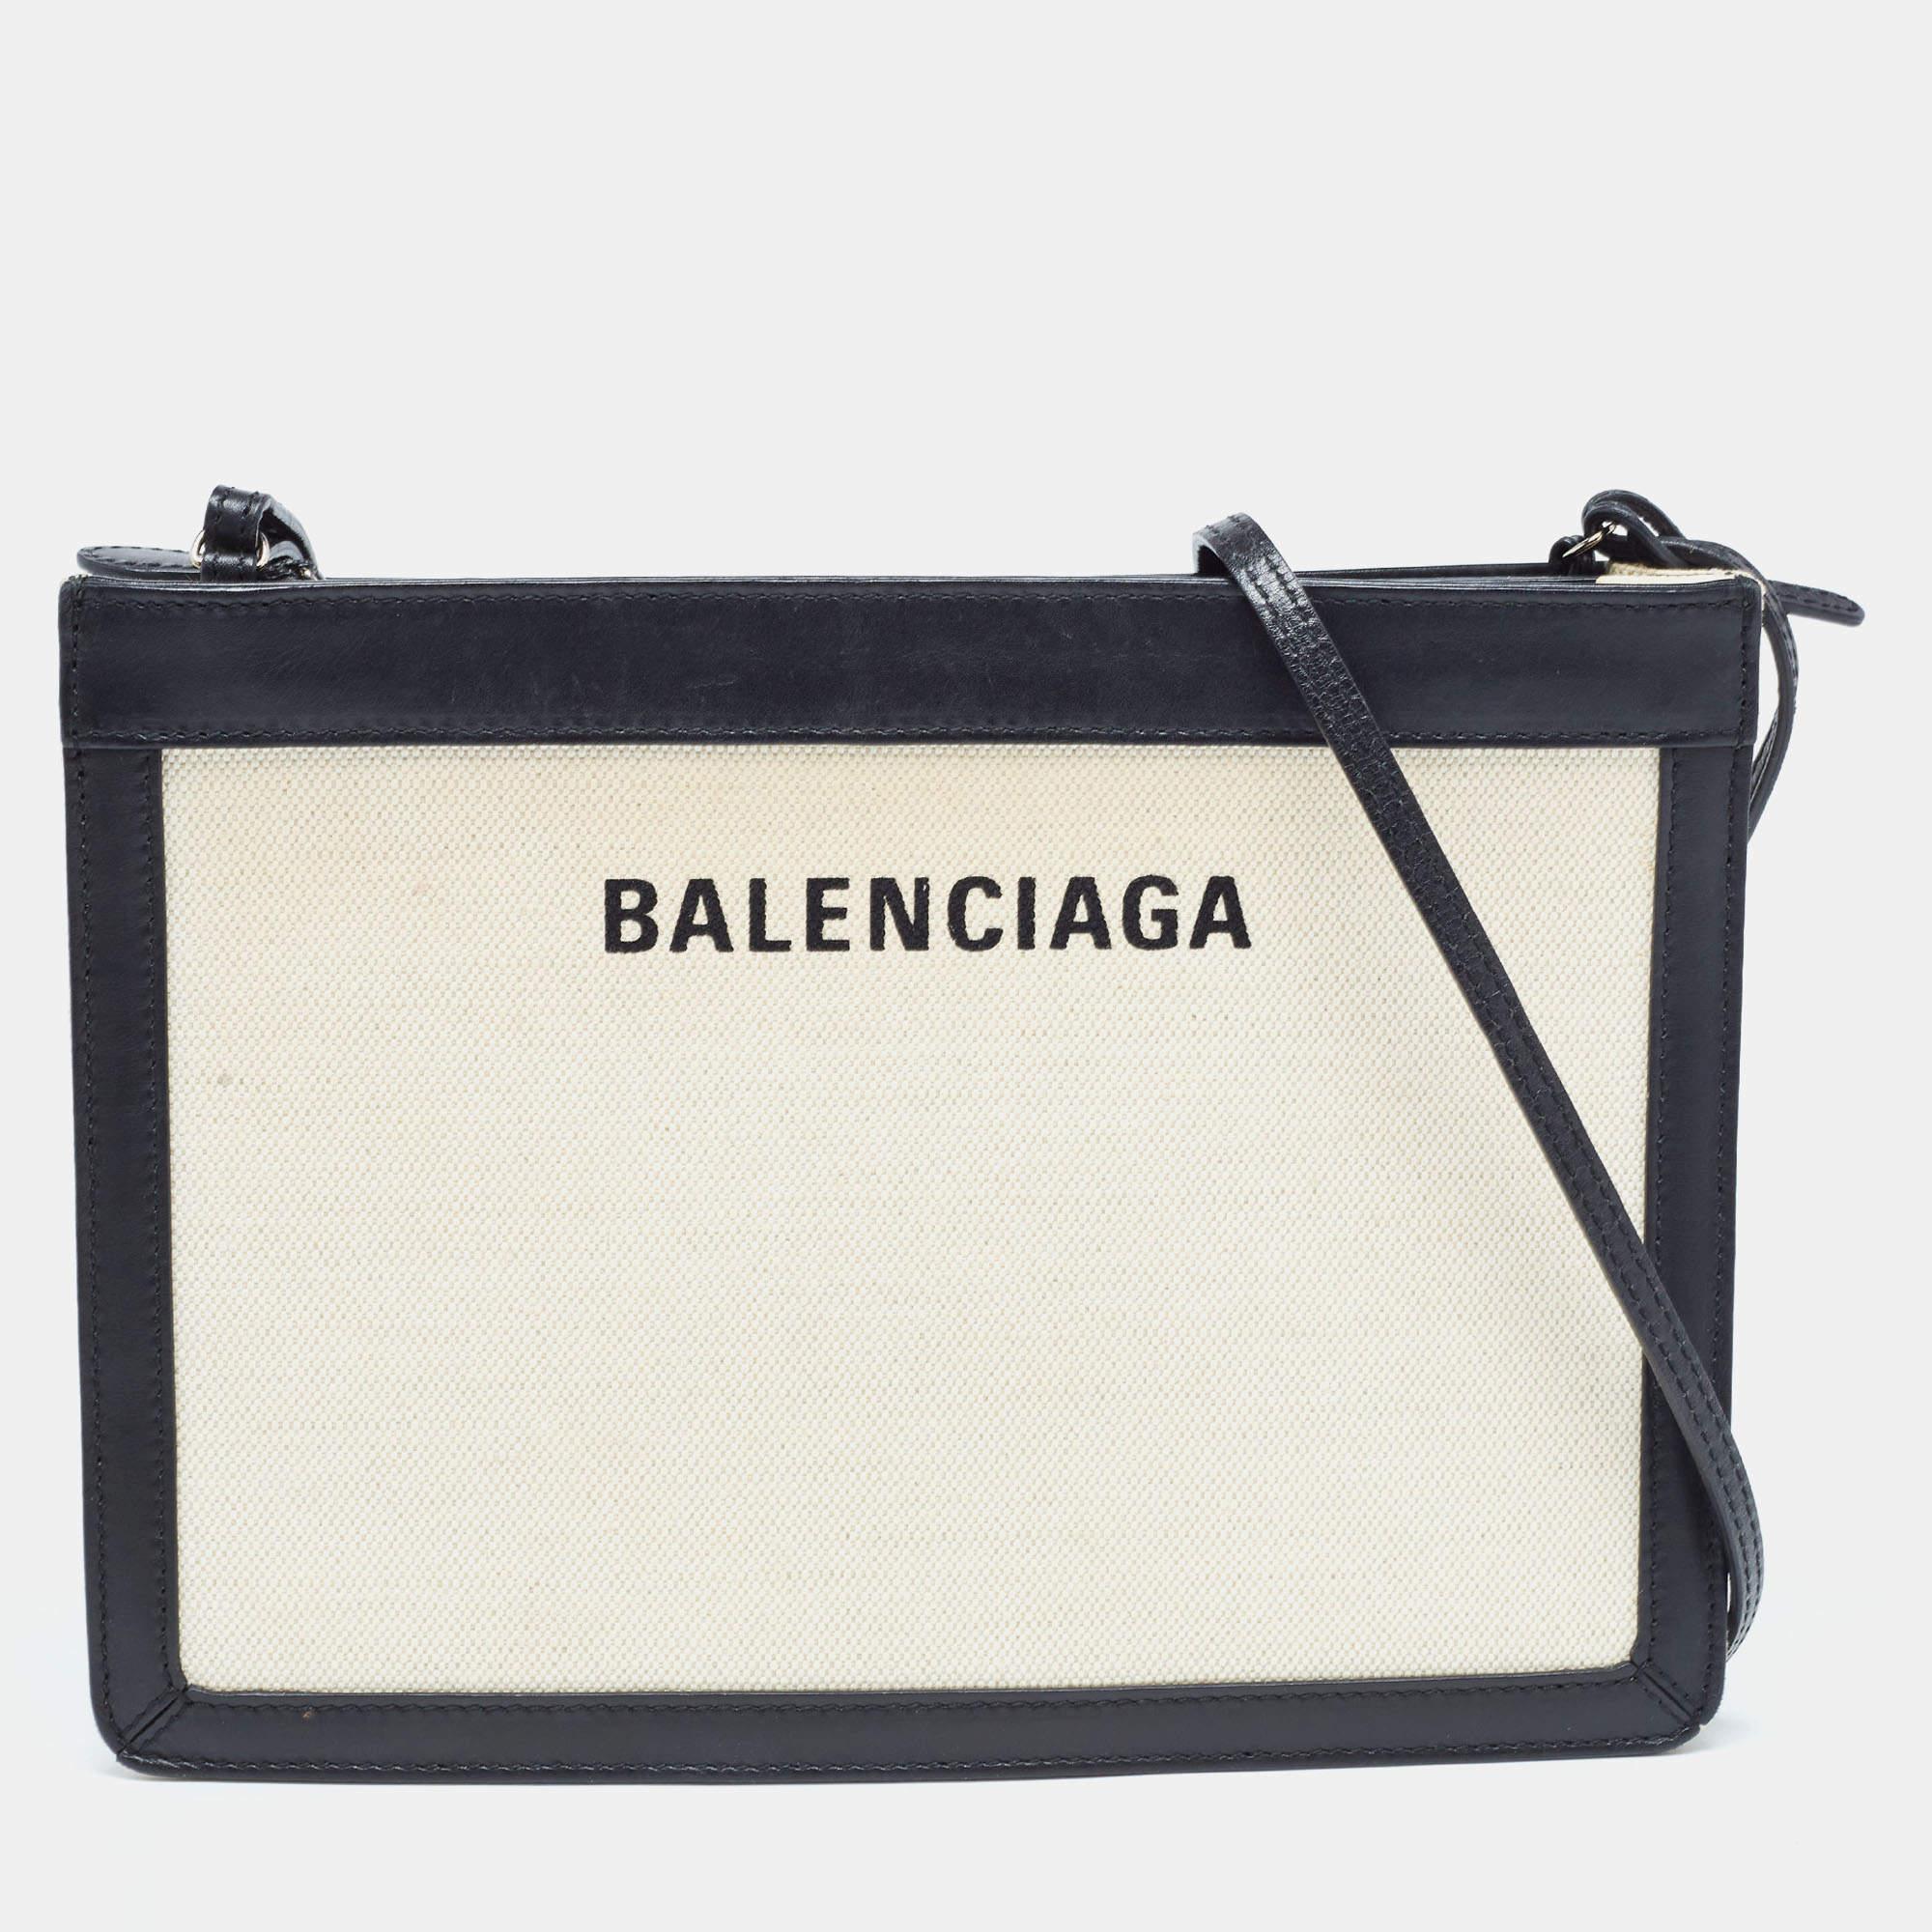 This lovely crossbody bag by Balenciaga will lend a stylish accent to your look of the day. It features a canvas & leather exterior, canvas interior, silver-tone hardware, and a shoulder strap.

